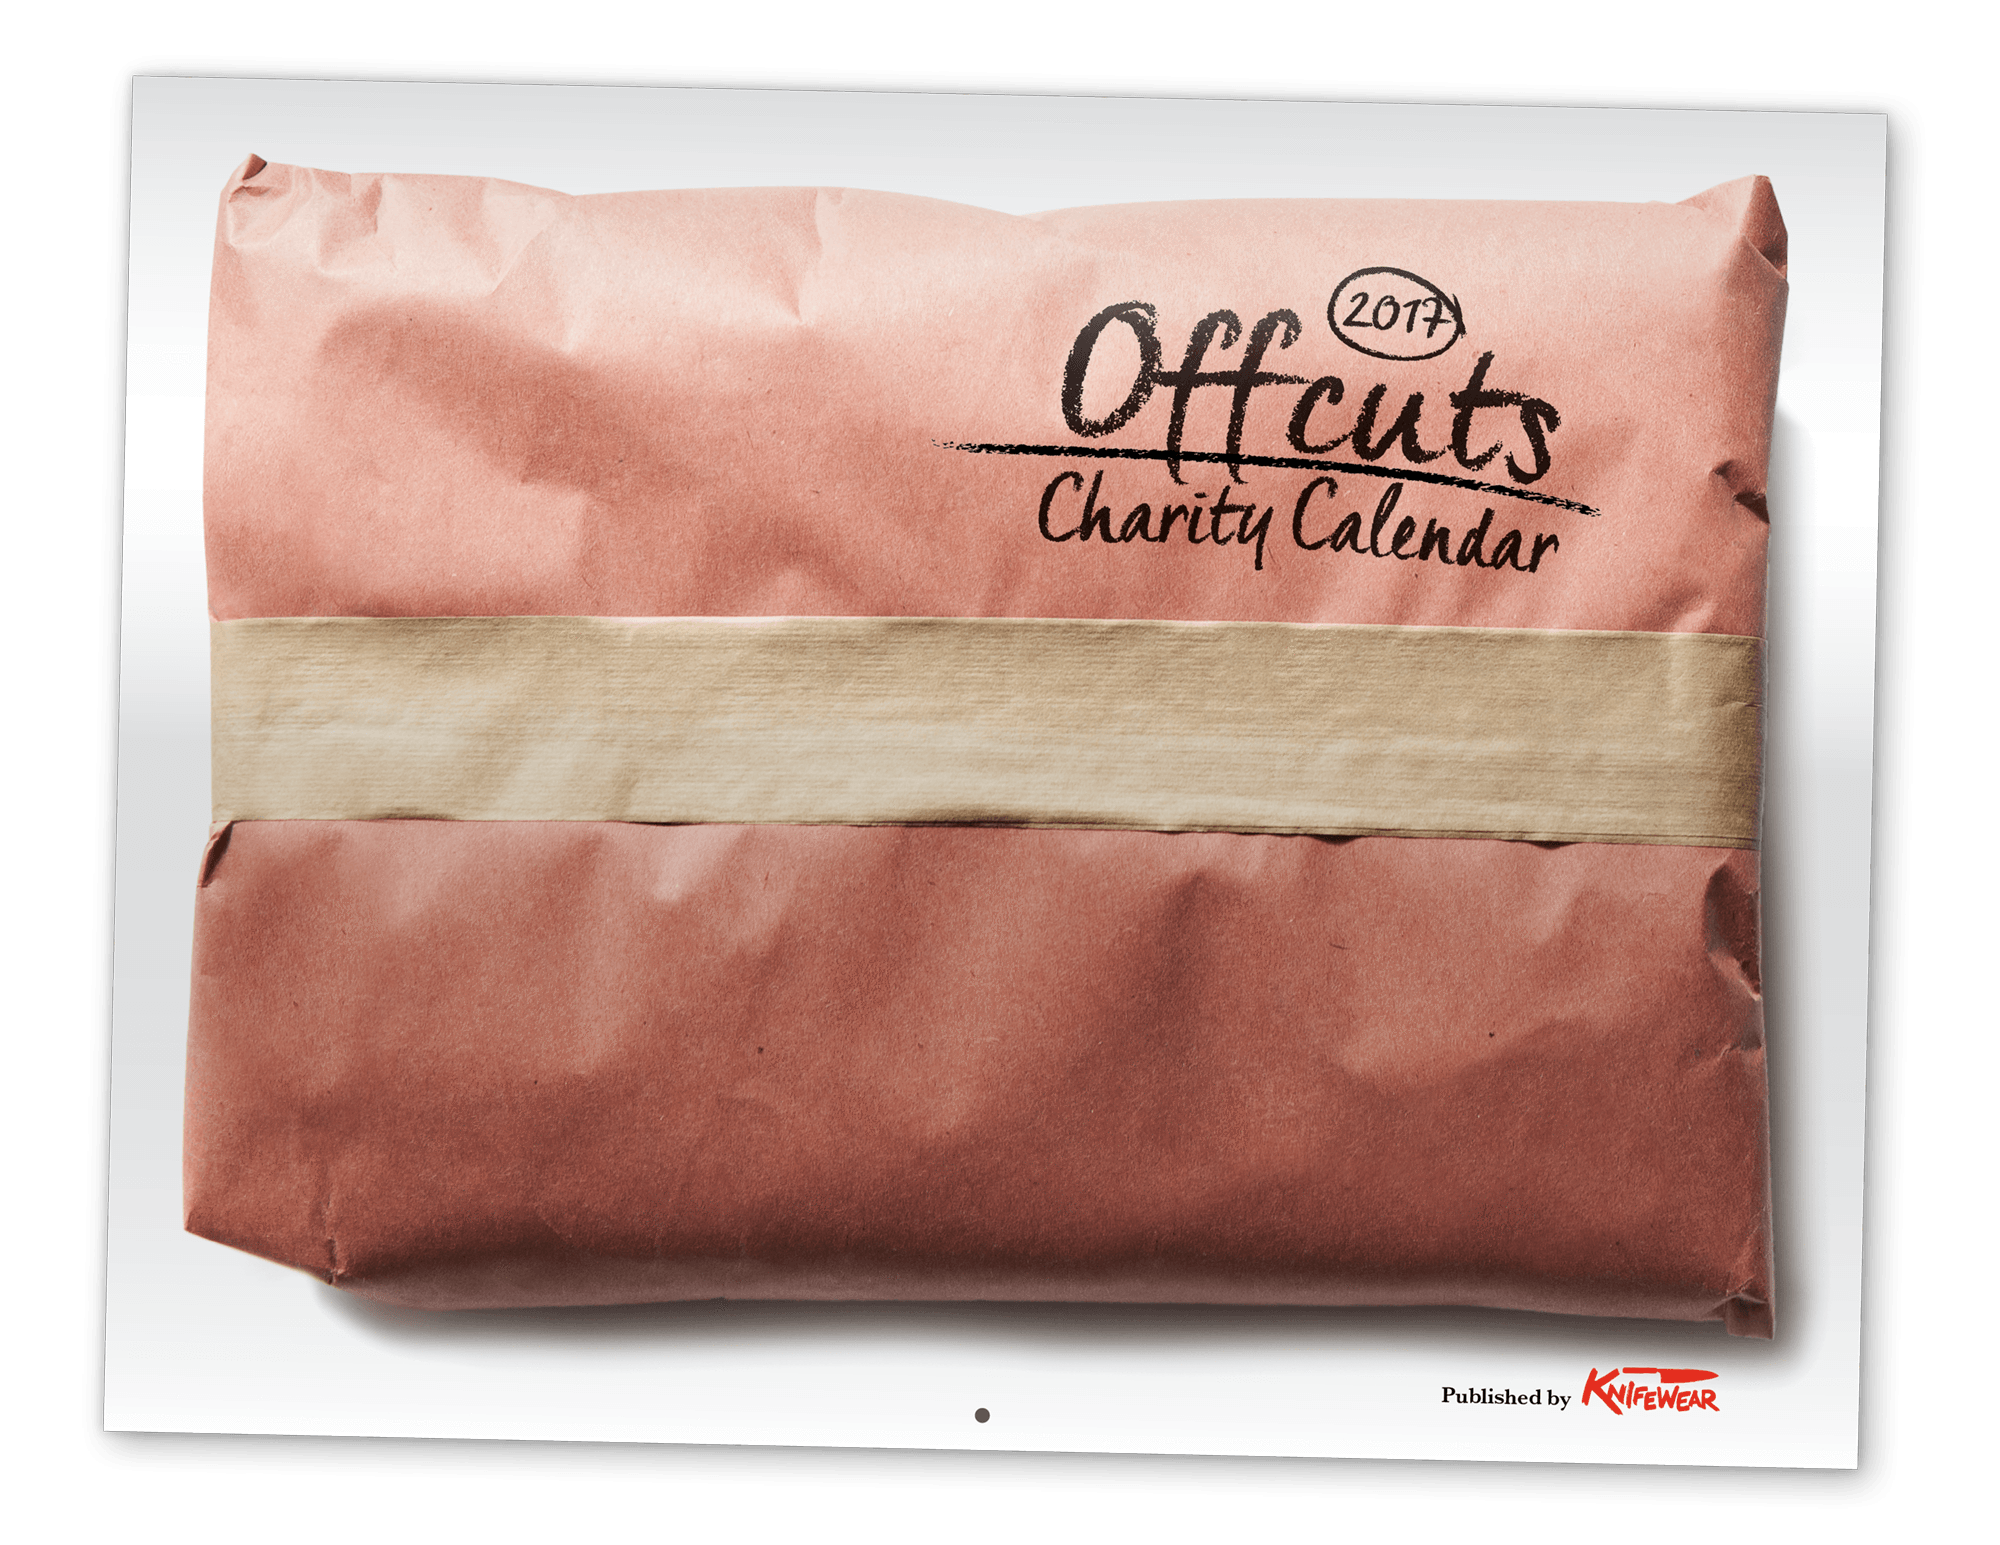 Offcuts 2017, Our Annual Charity Calendar, is Back!